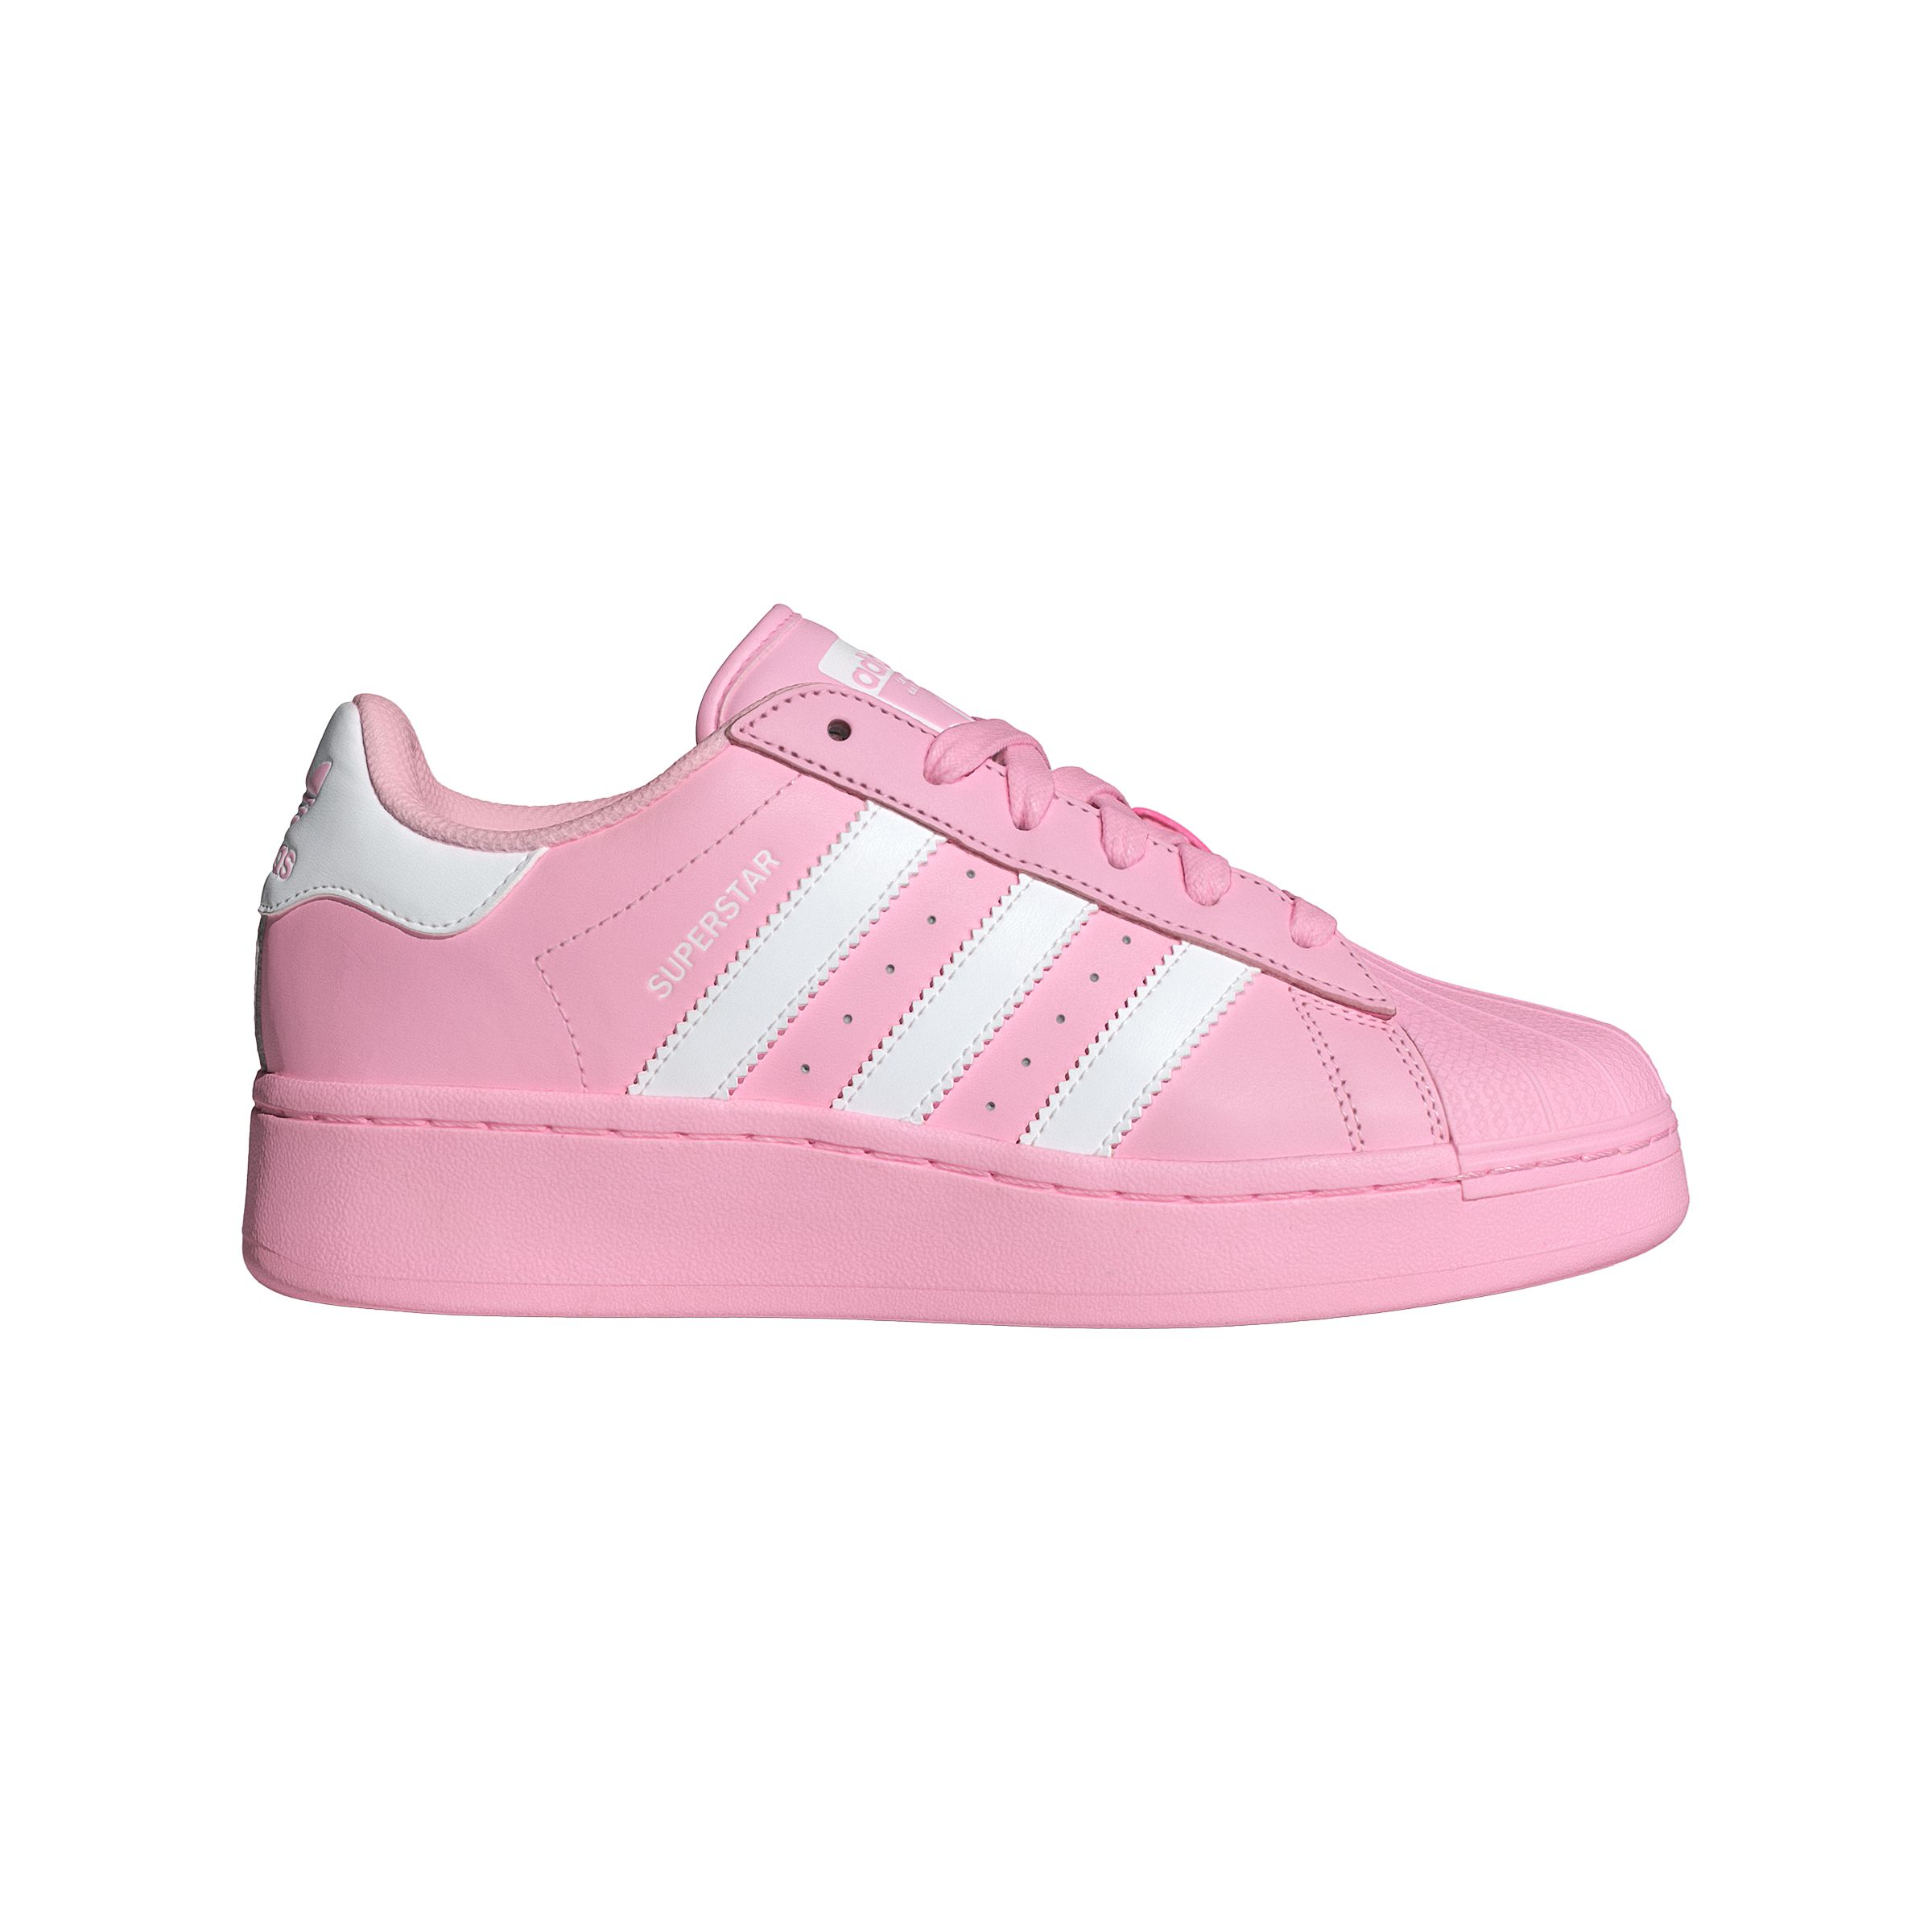 Image of adidas Women's Superstar XLG Shoes